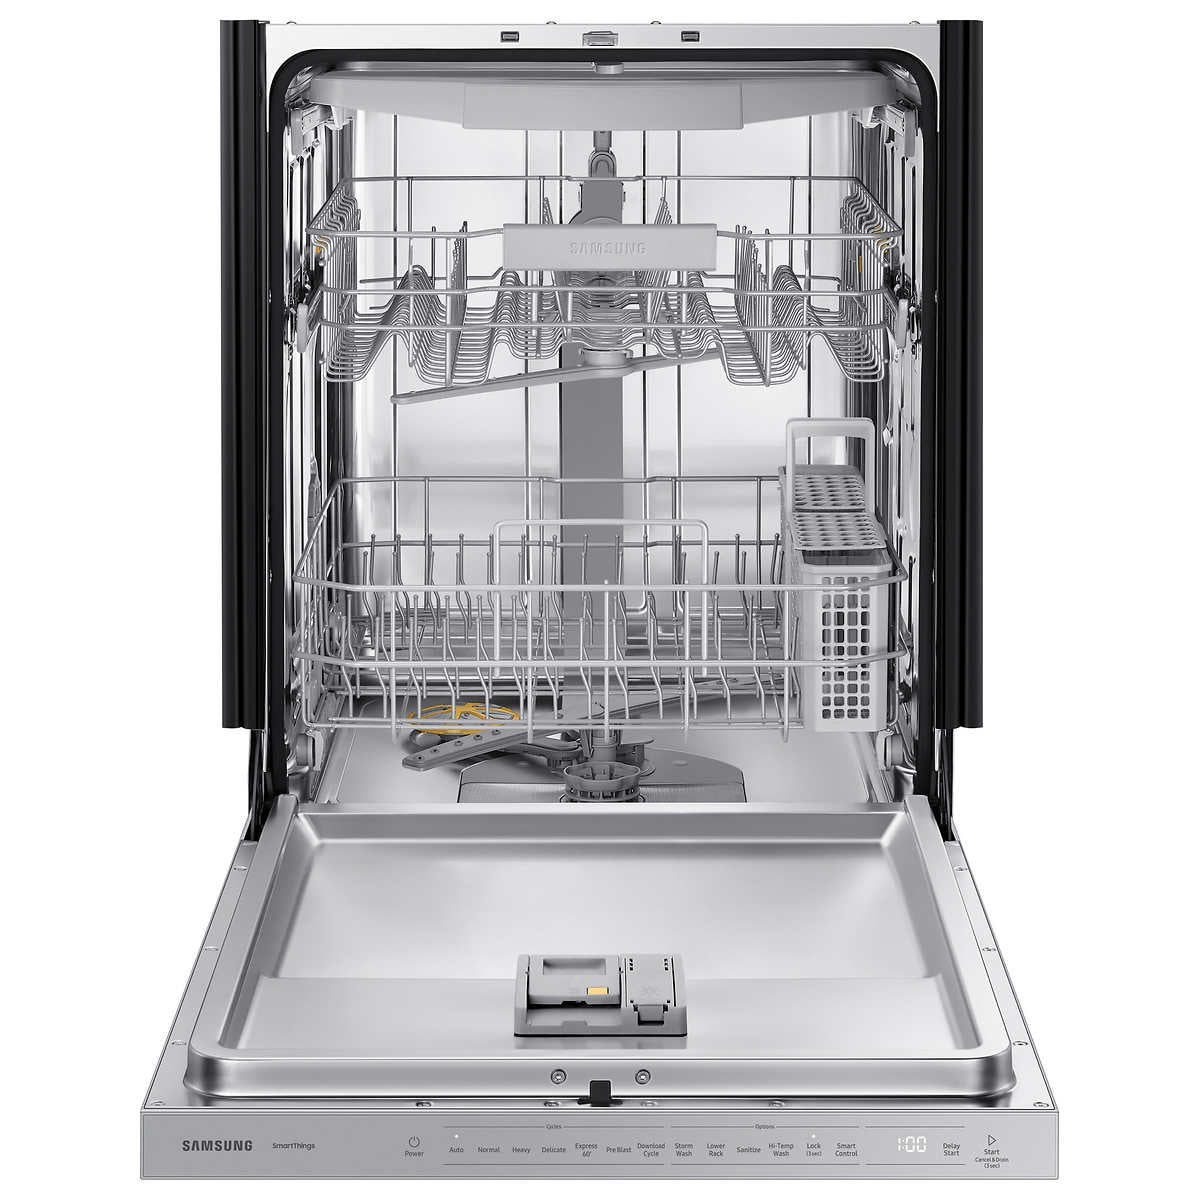 Samsung 24 in. Stainless Steel Dishwasher with Auto Open Dry and Third Rack